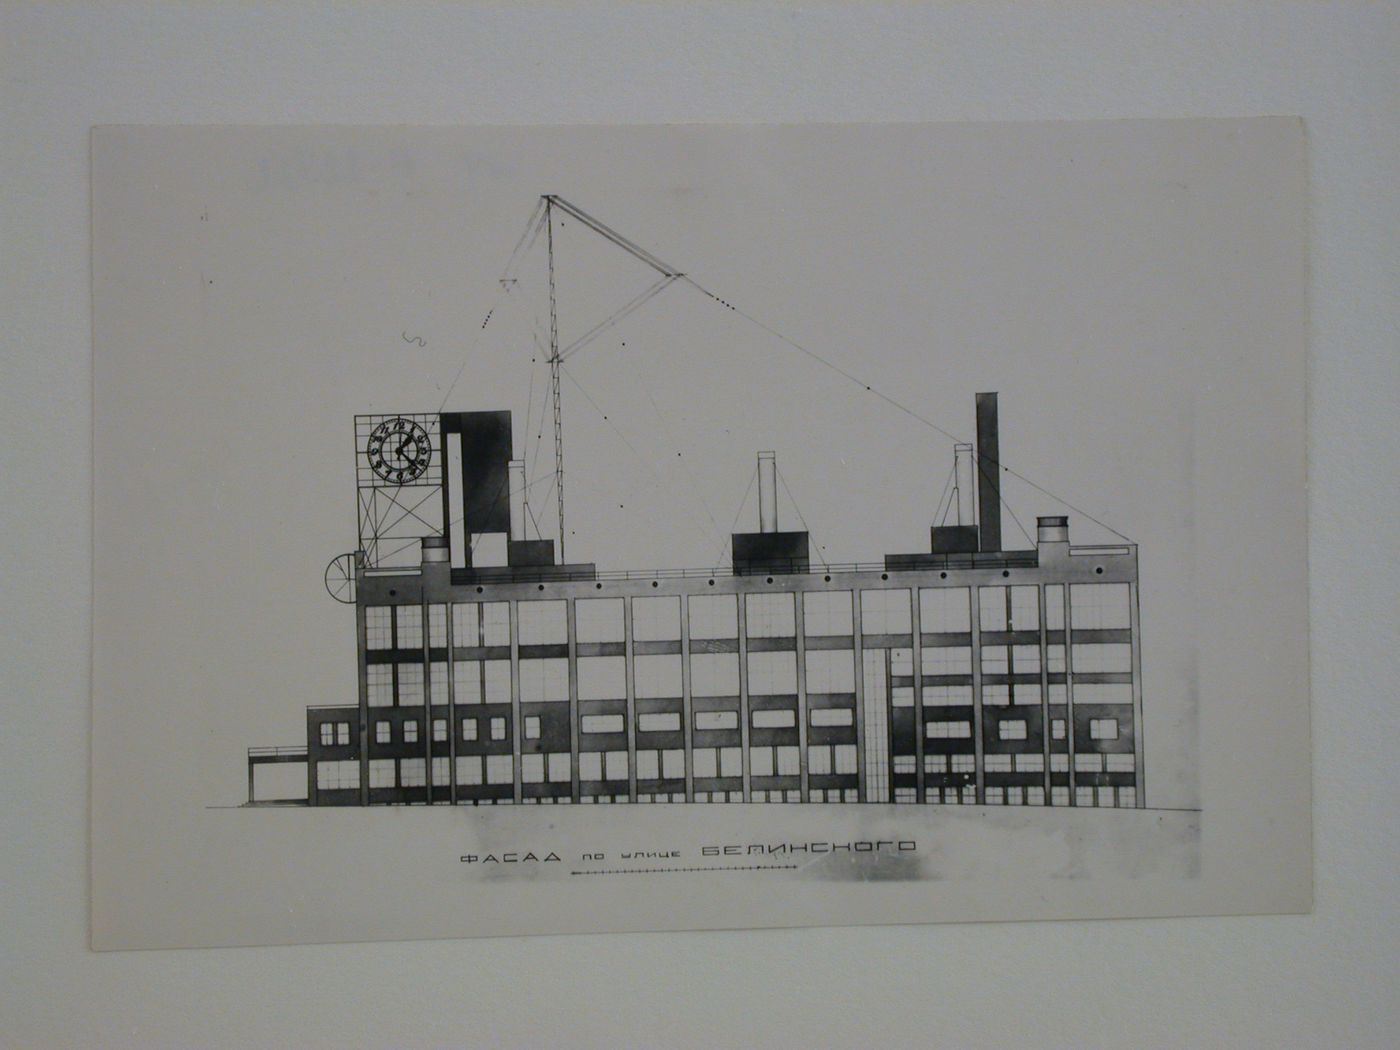 Photograph of an elevation for a lateral façade for the Central Telegraph Office, Moscow